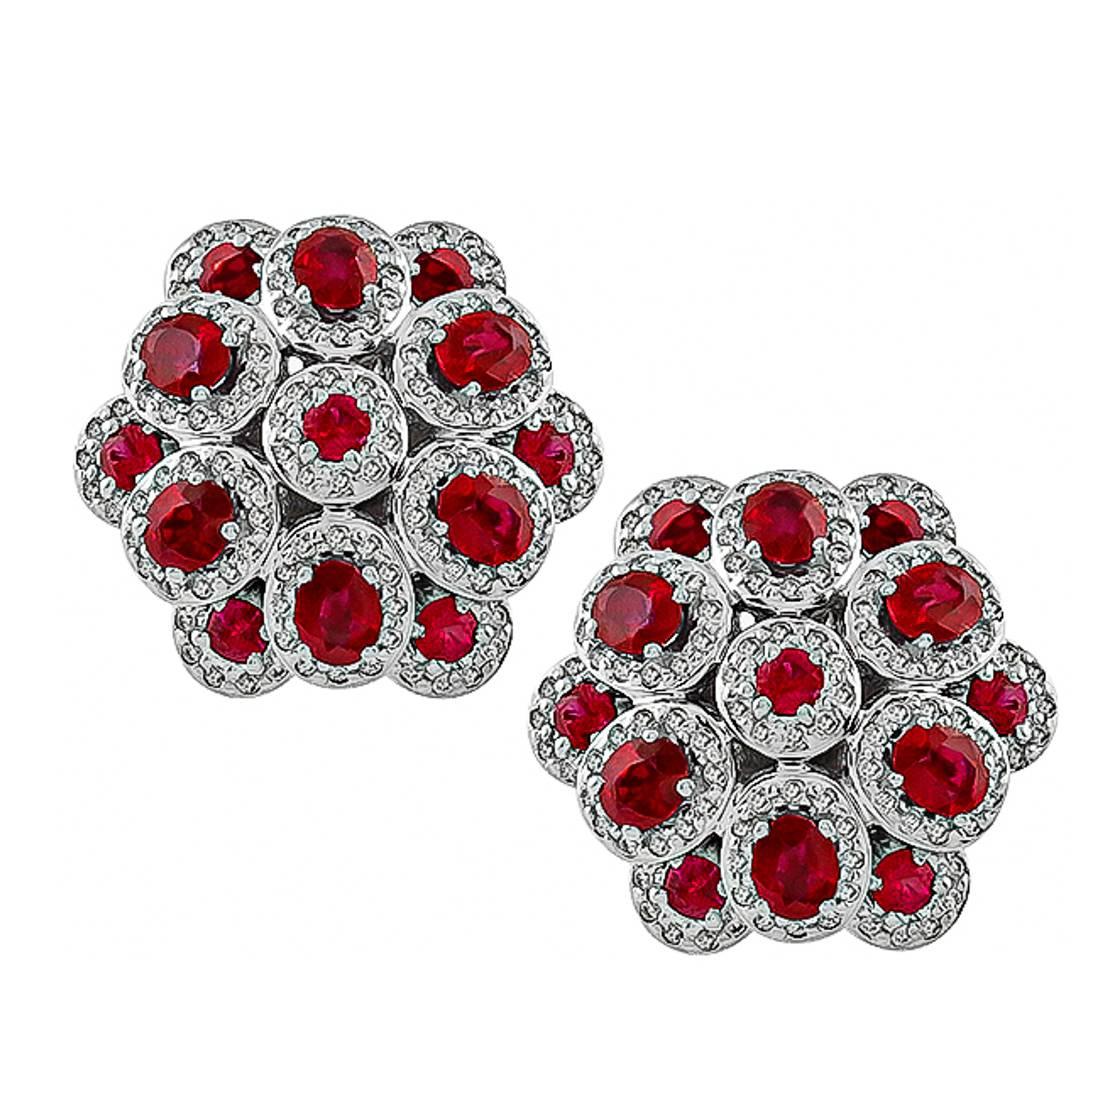 Magnificent Ruby Diamond Gold Cluster Earrings